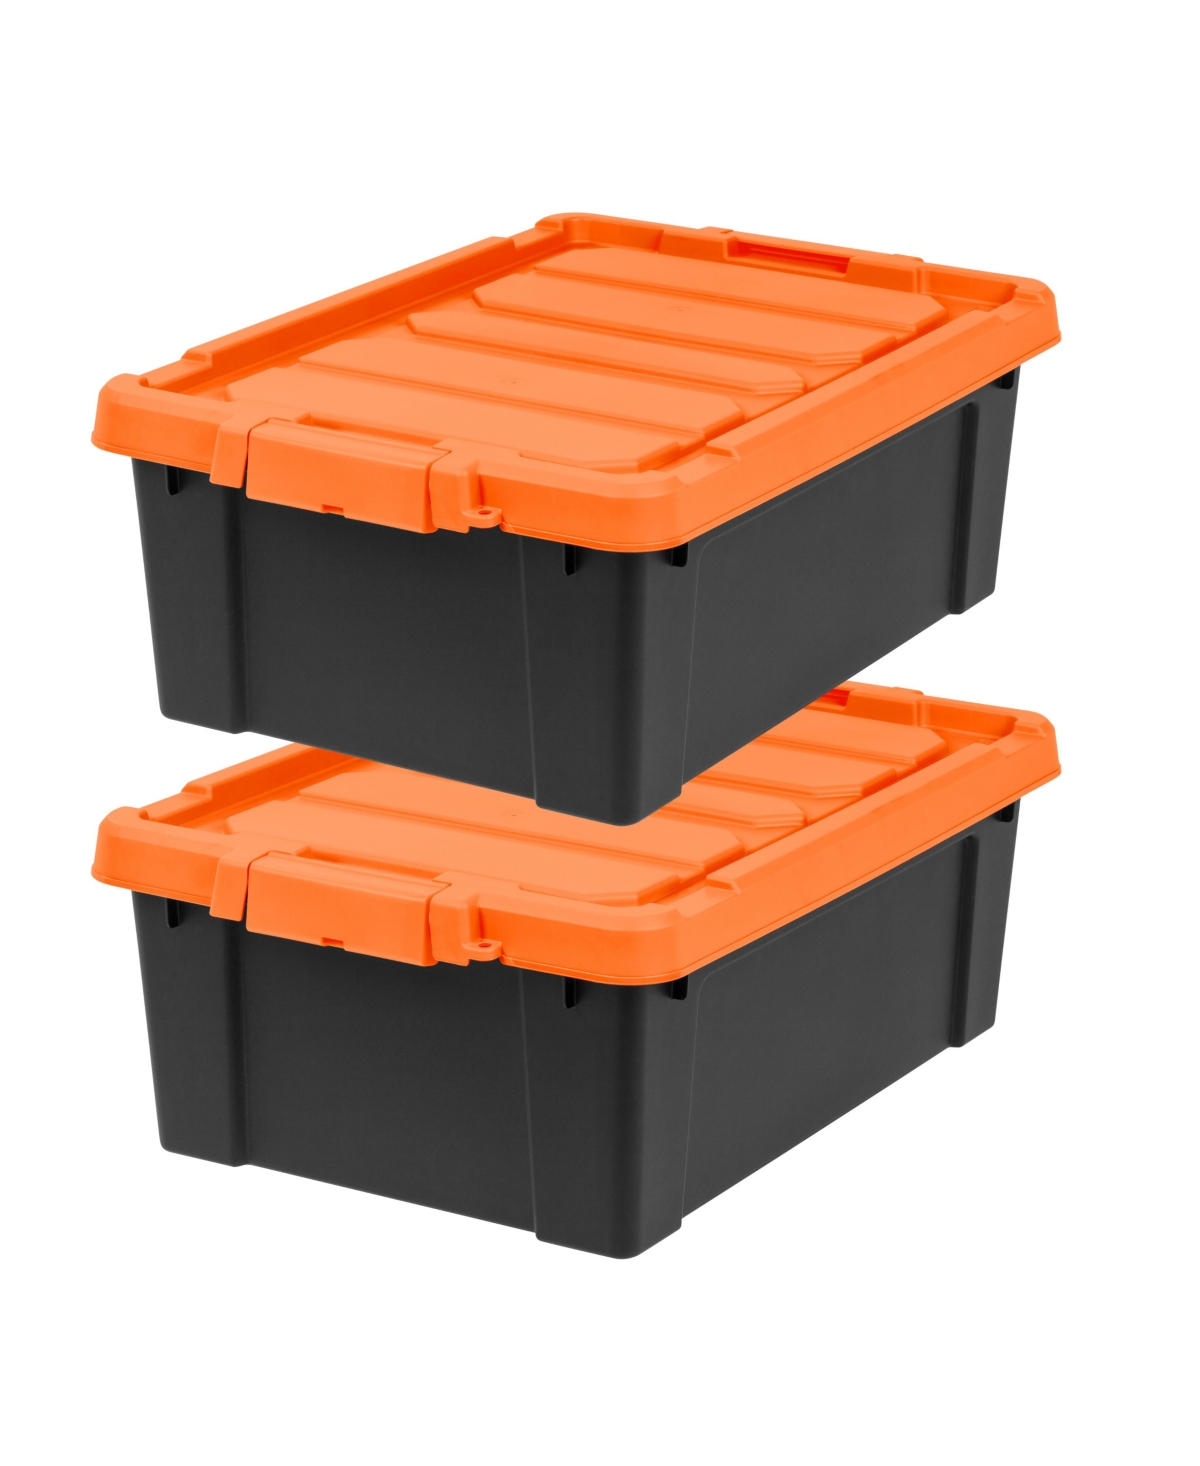 11 Gallon Heavy-Duty Plastic Storage Bins, Store-It-All Container Totes with Durable Lid and Secure Latching Buckles, Black/Orange, 2 Pack - Orange